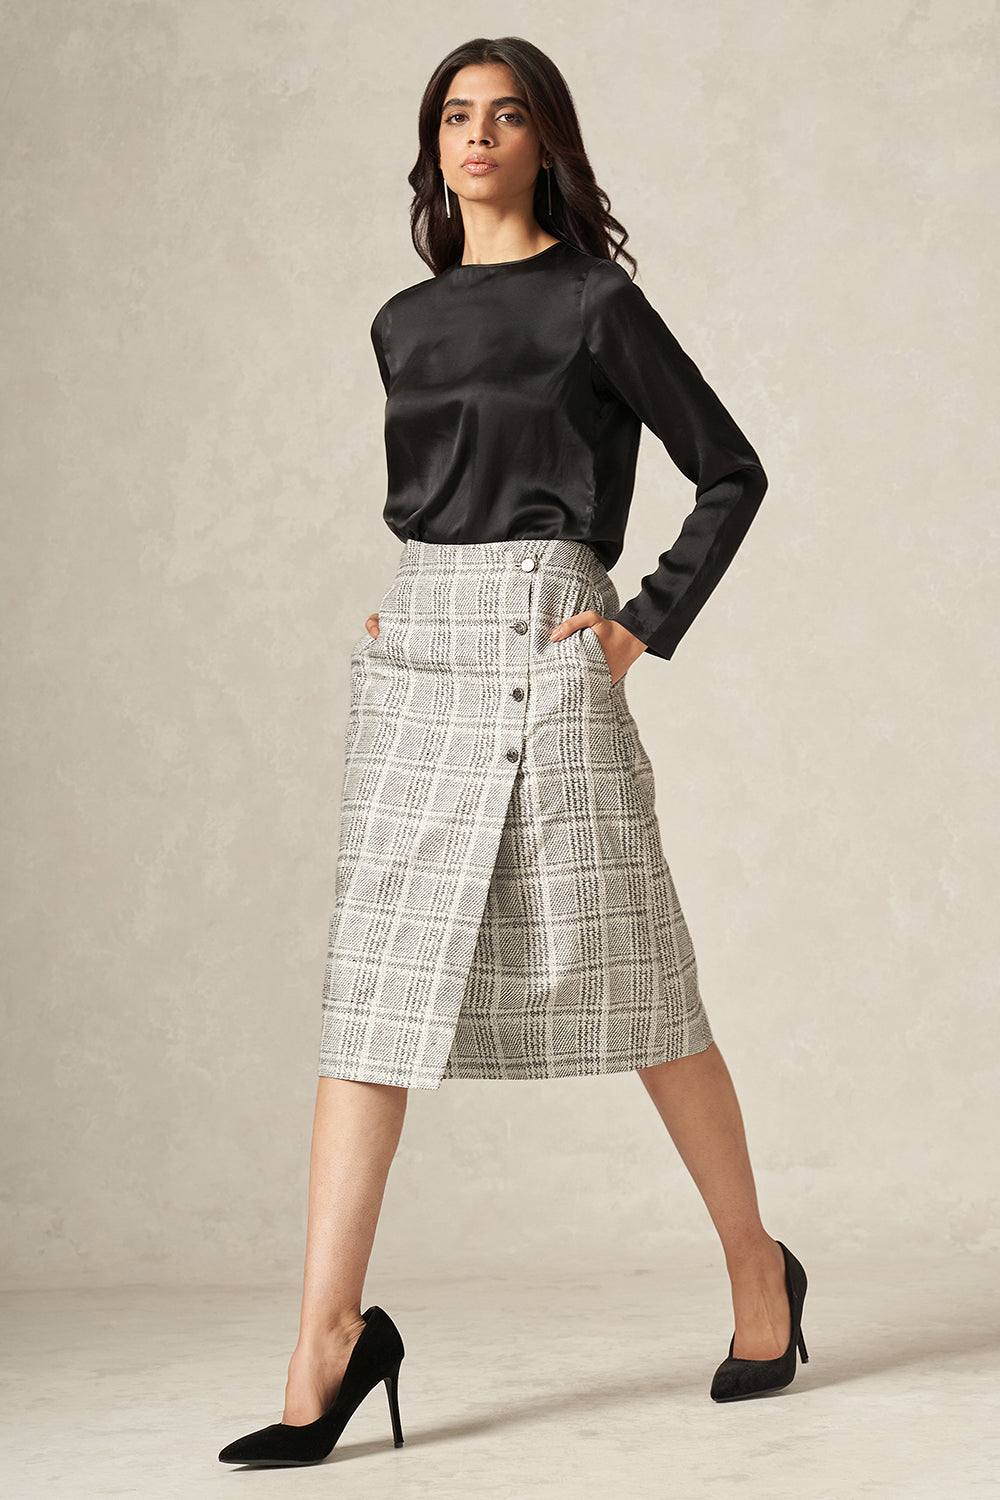 Black and White Pure Silk Handwoven Plaid Patterned Wrap Skirt